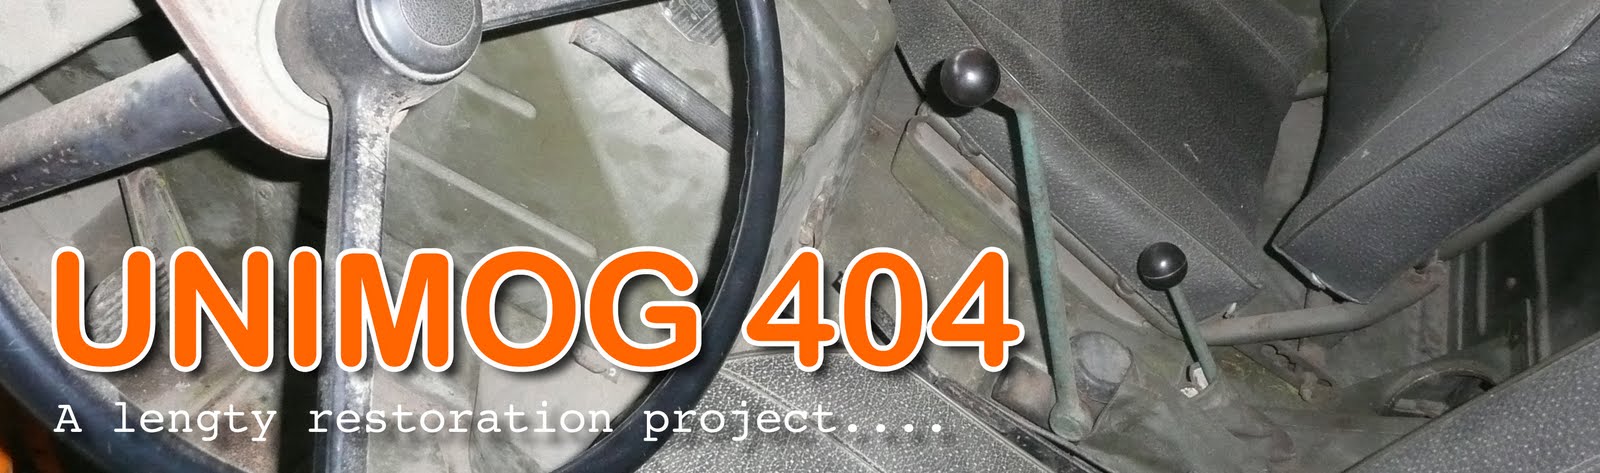 UNIMOG 404, a lenghty restauration project